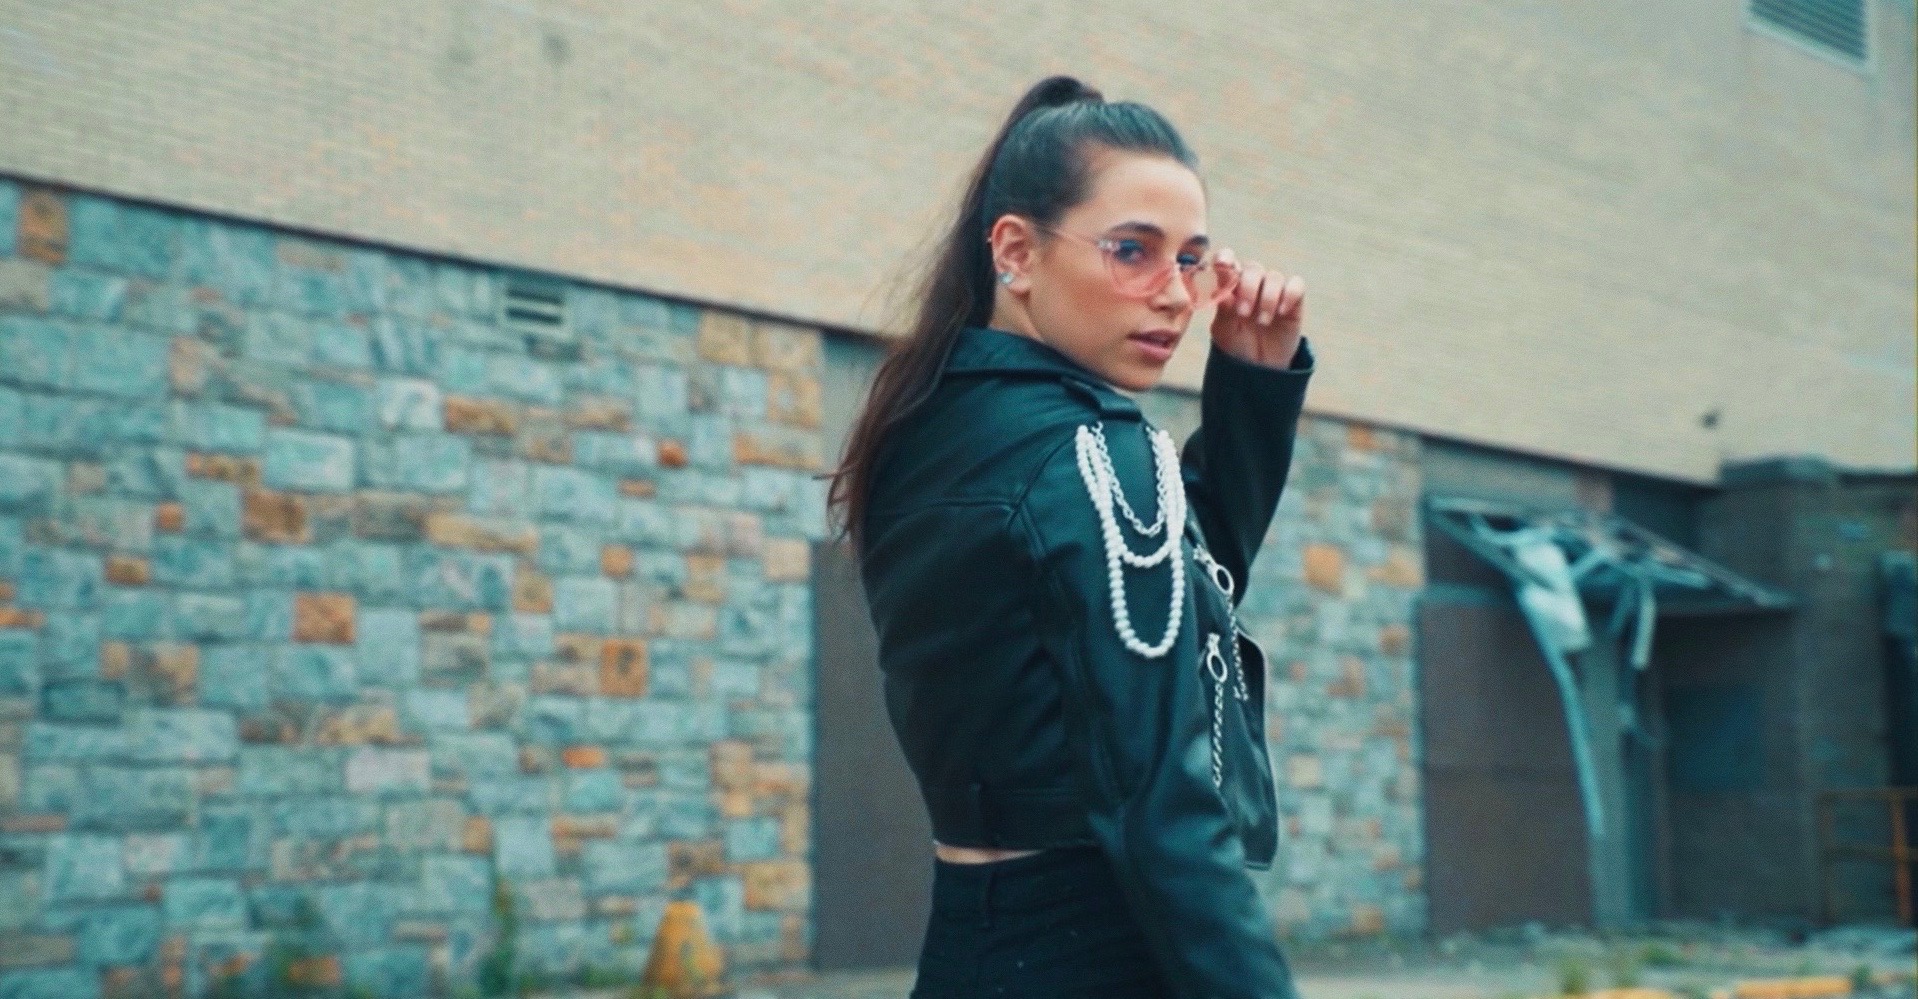 Sky Katz is 'Back At It' with New Video.